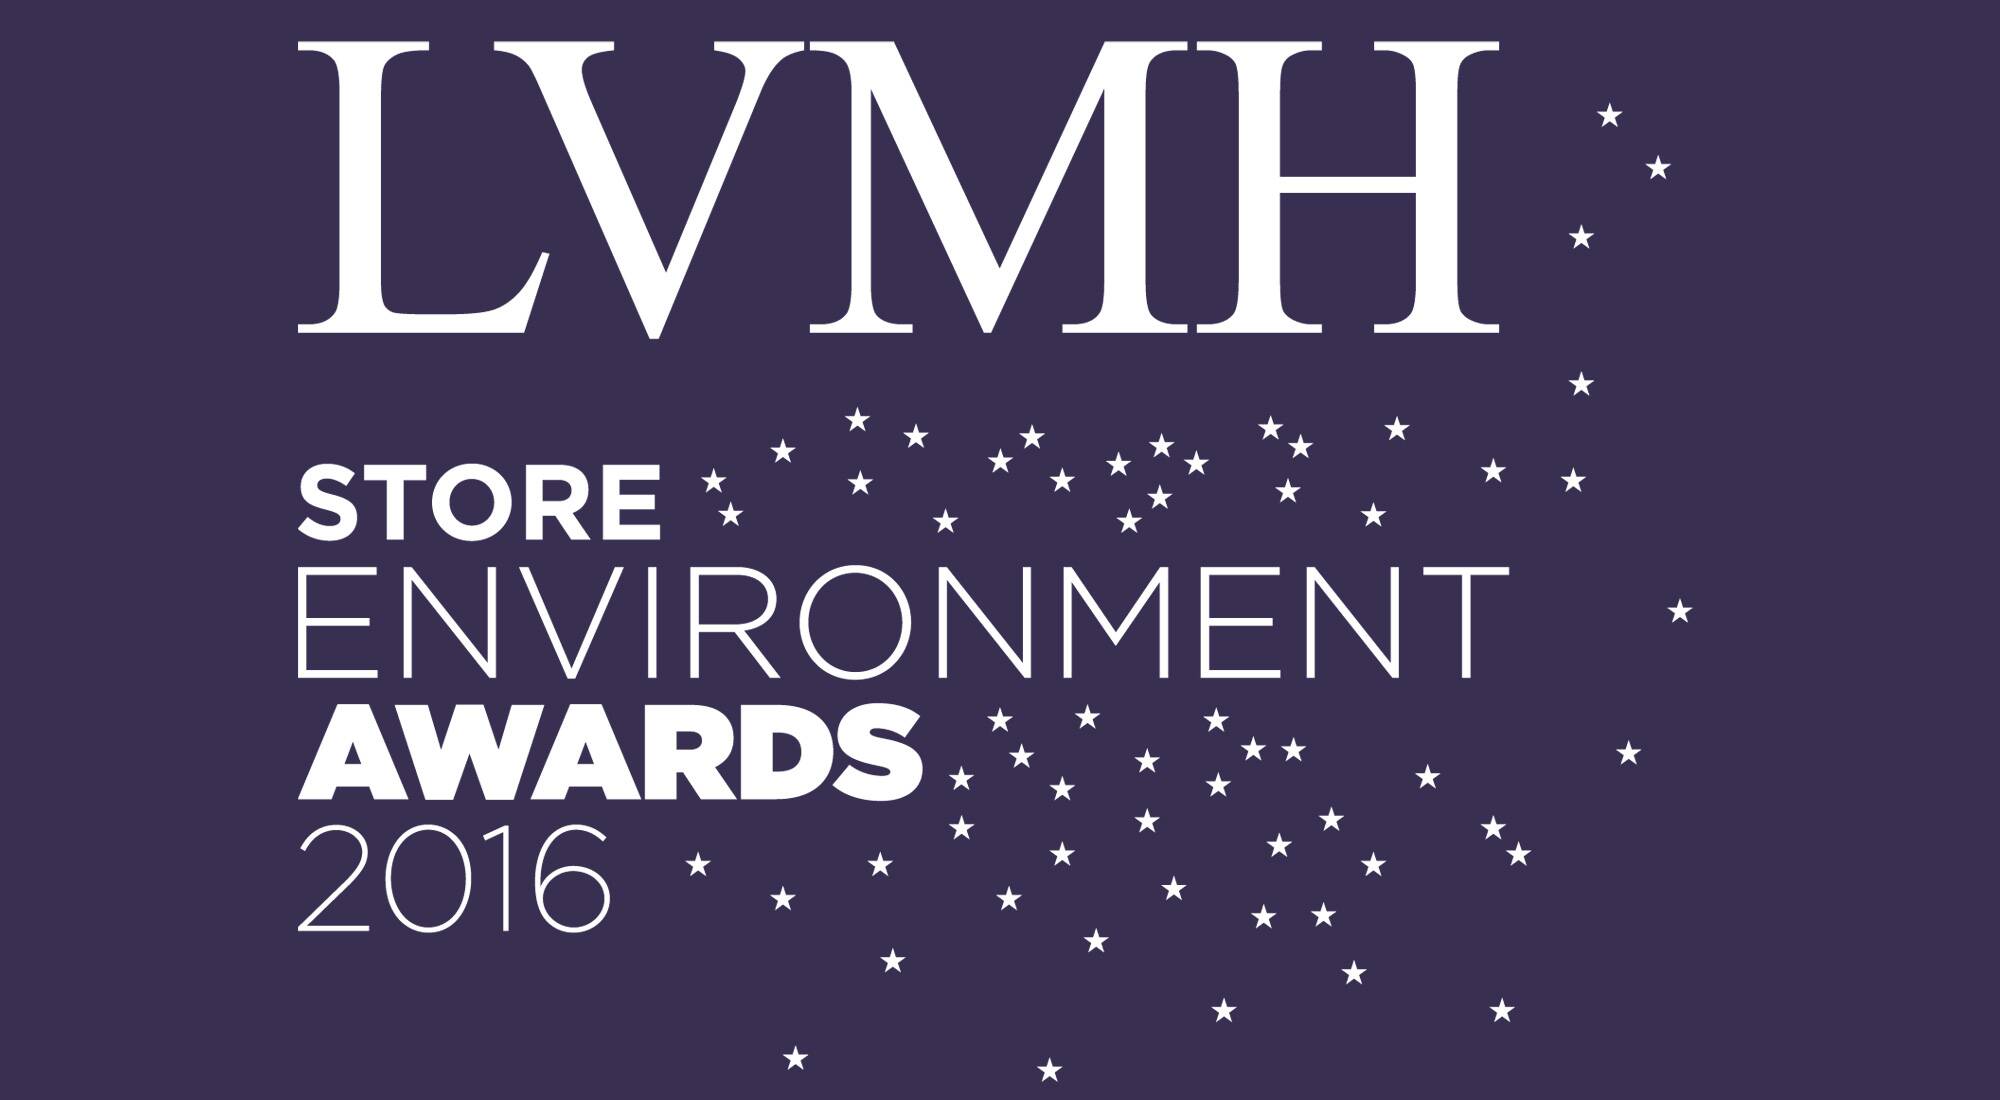 LVMH implements €5 million+ internal carbon fund in environmental